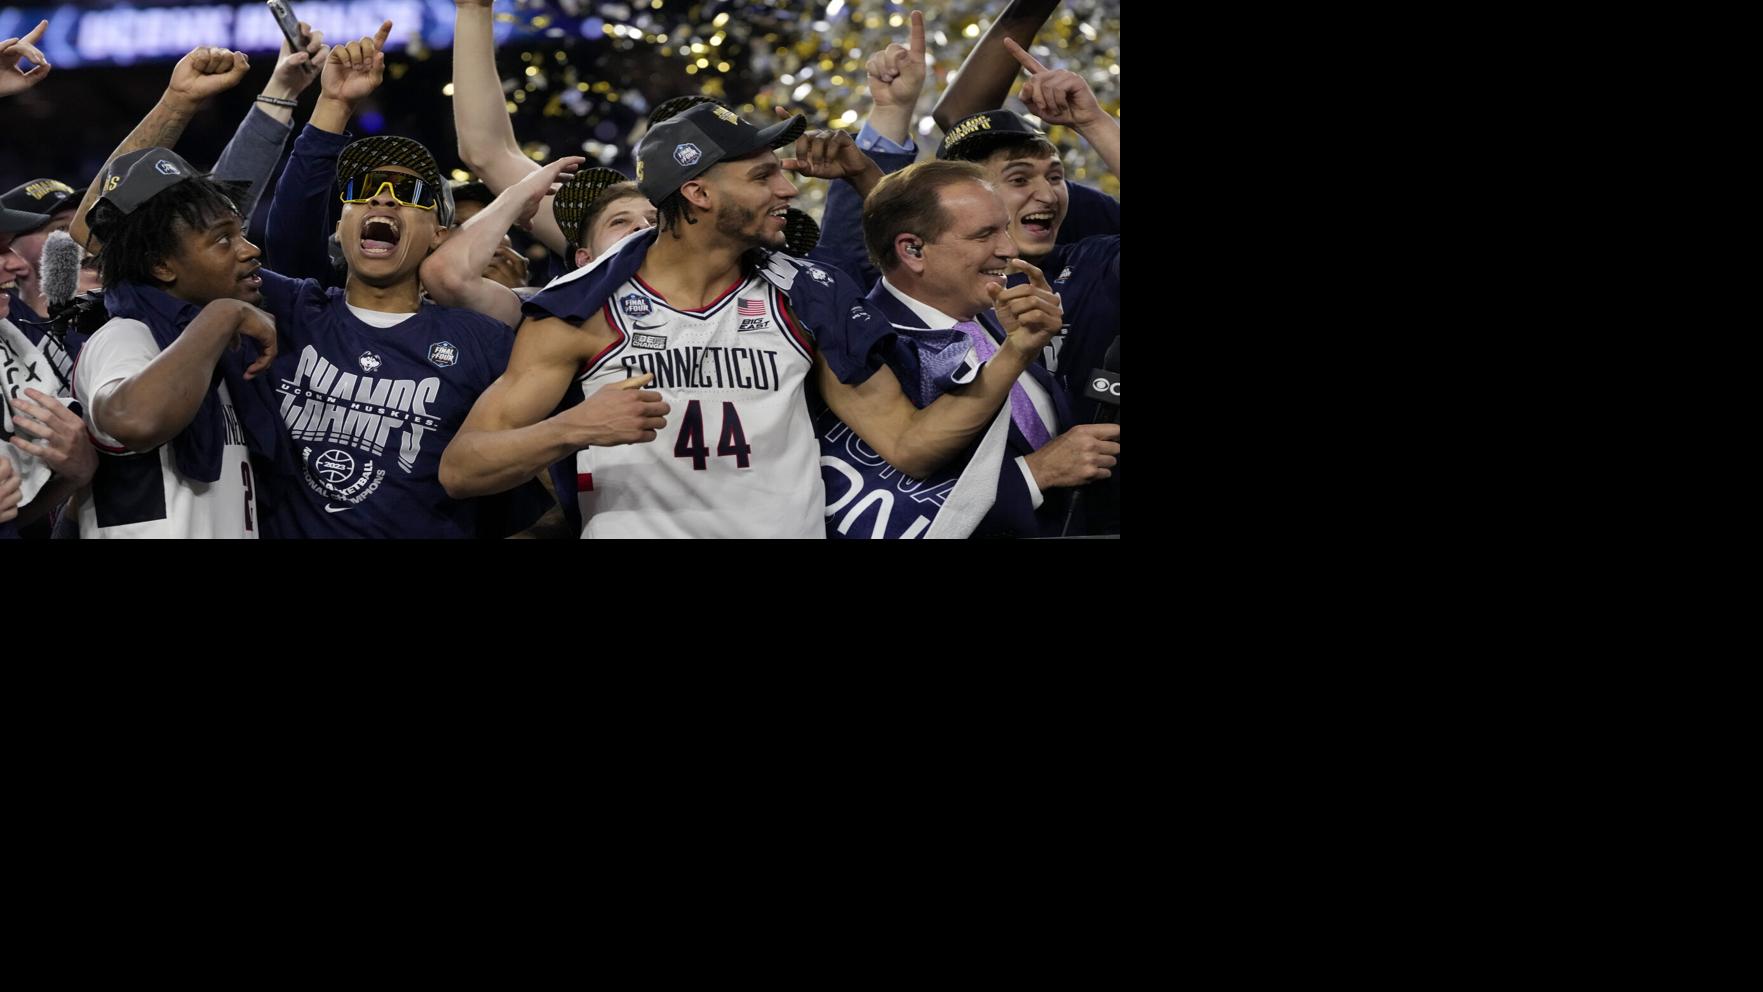 UConn wins March Madness with 76-59 smothering of SDSU